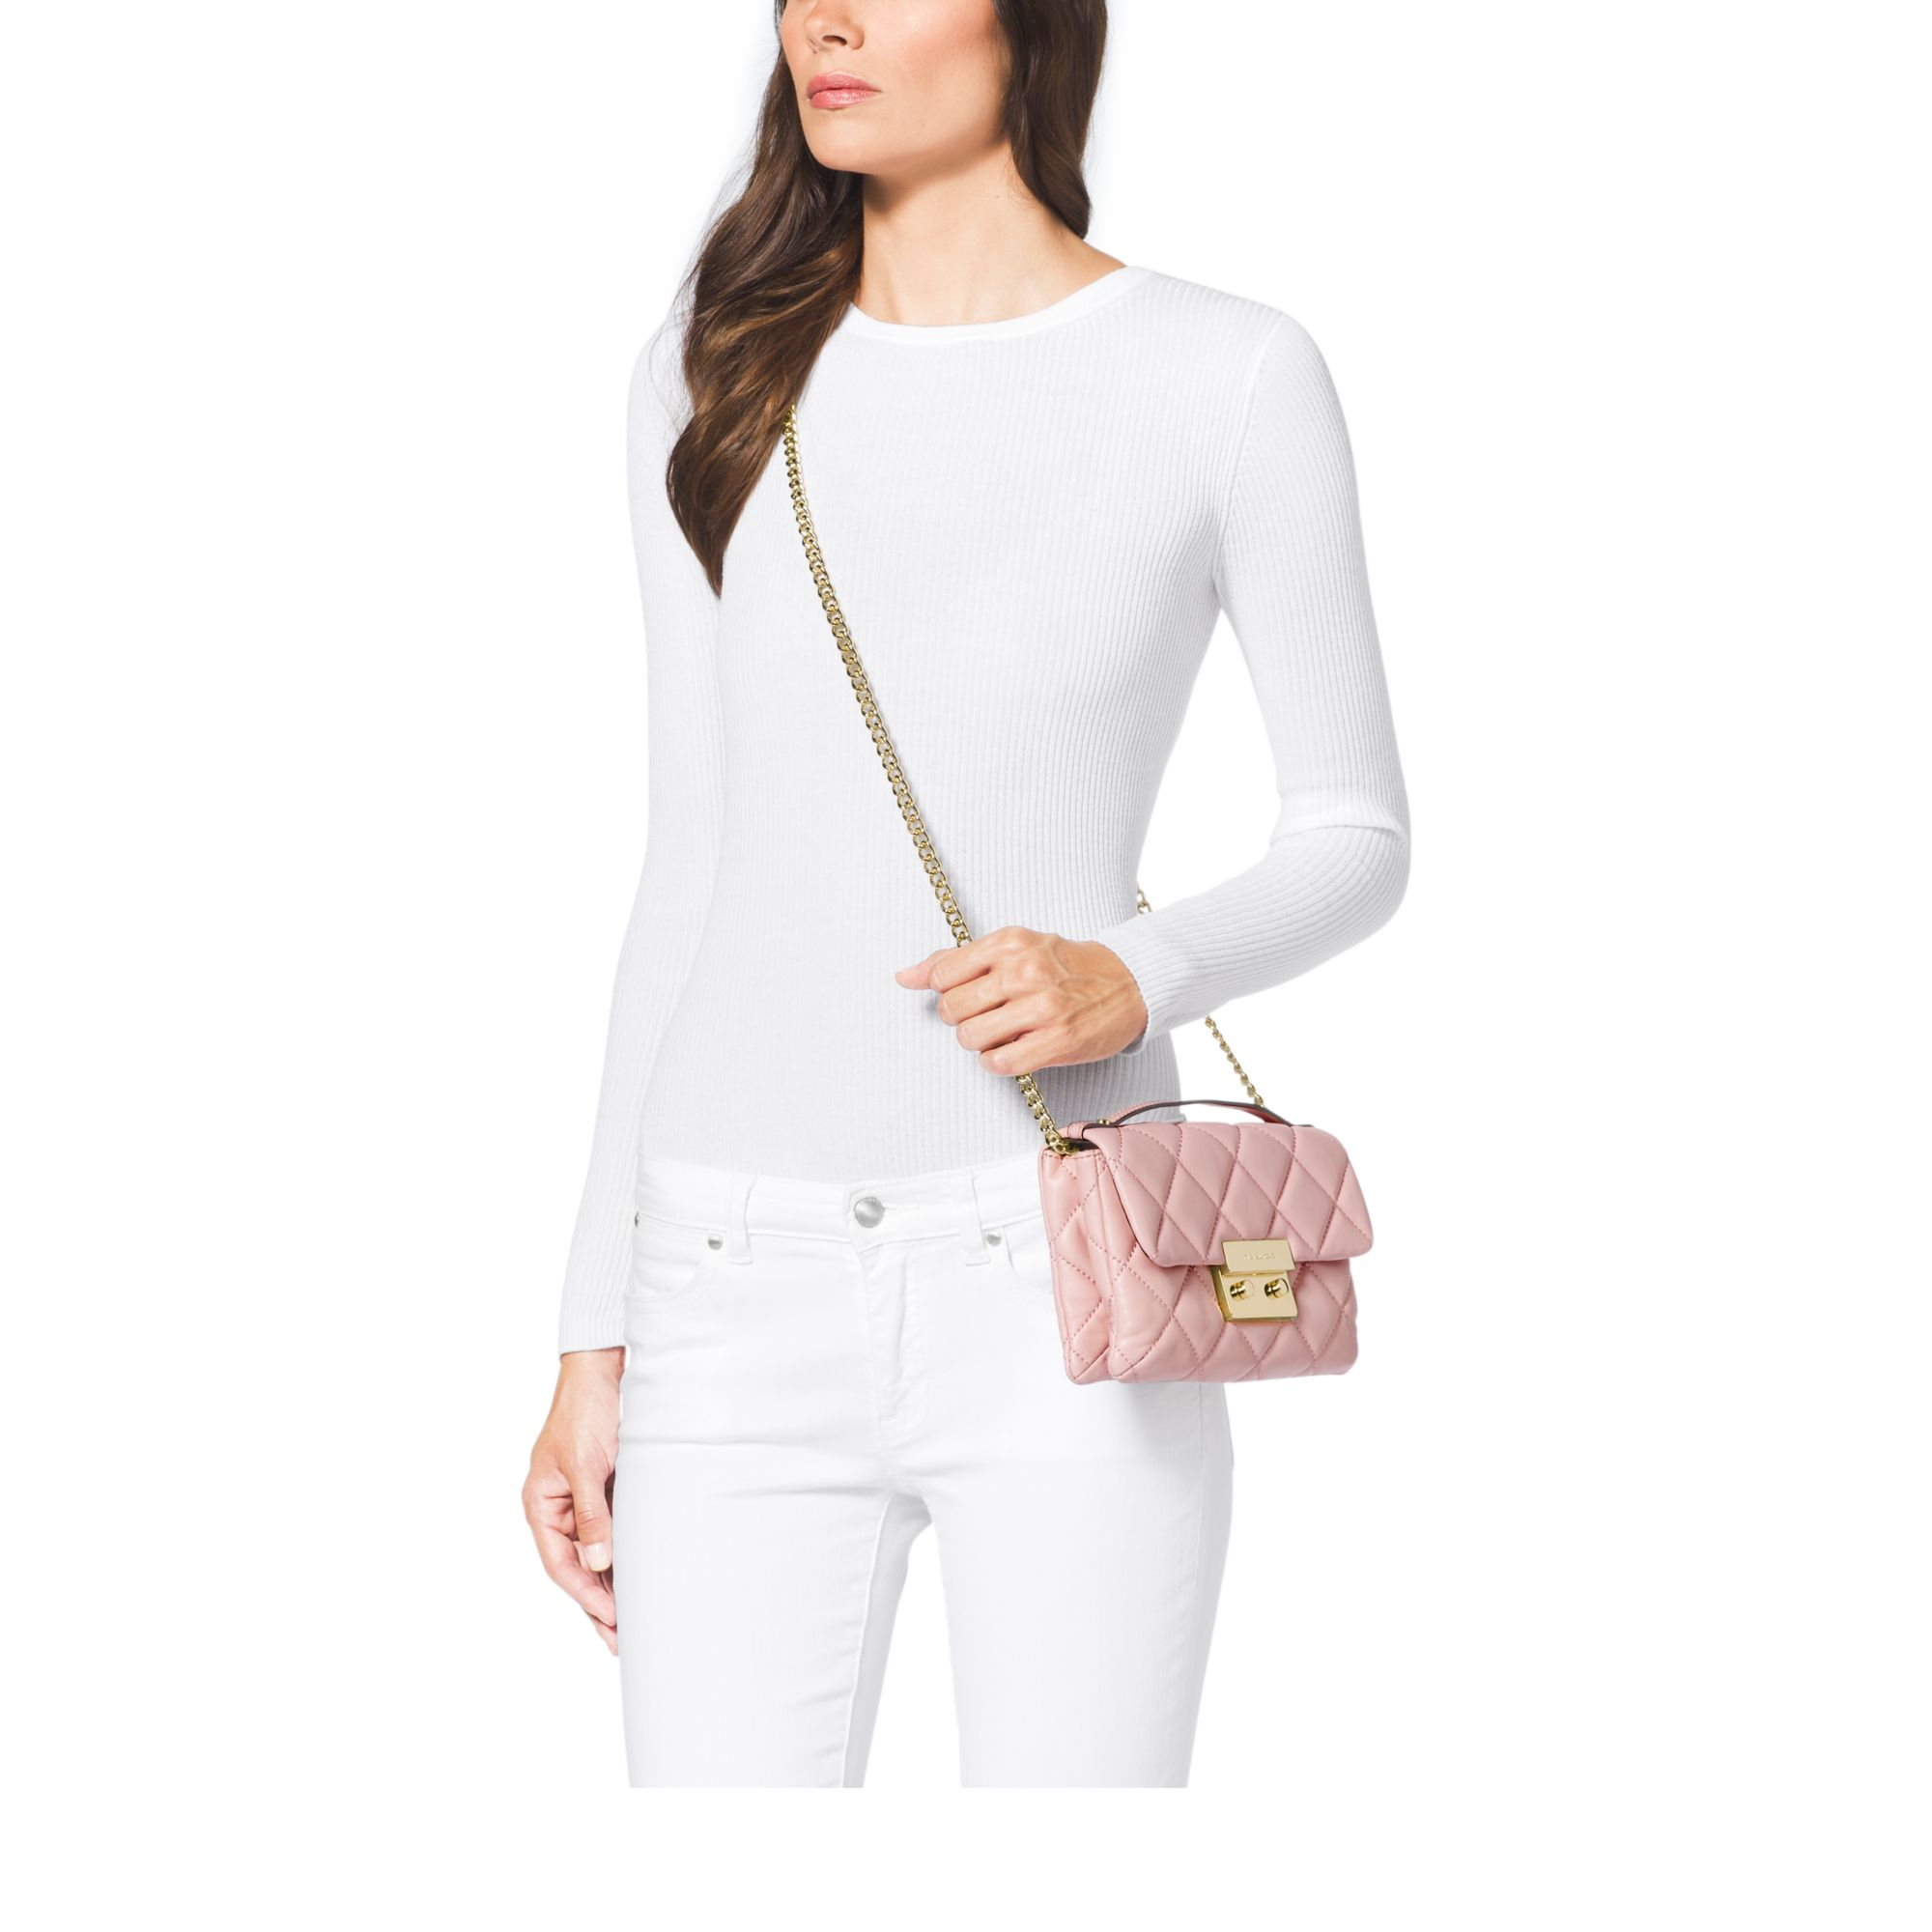 Lyst - Michael Kors Sloan Small Quilted Cross-Body Bag in Pink